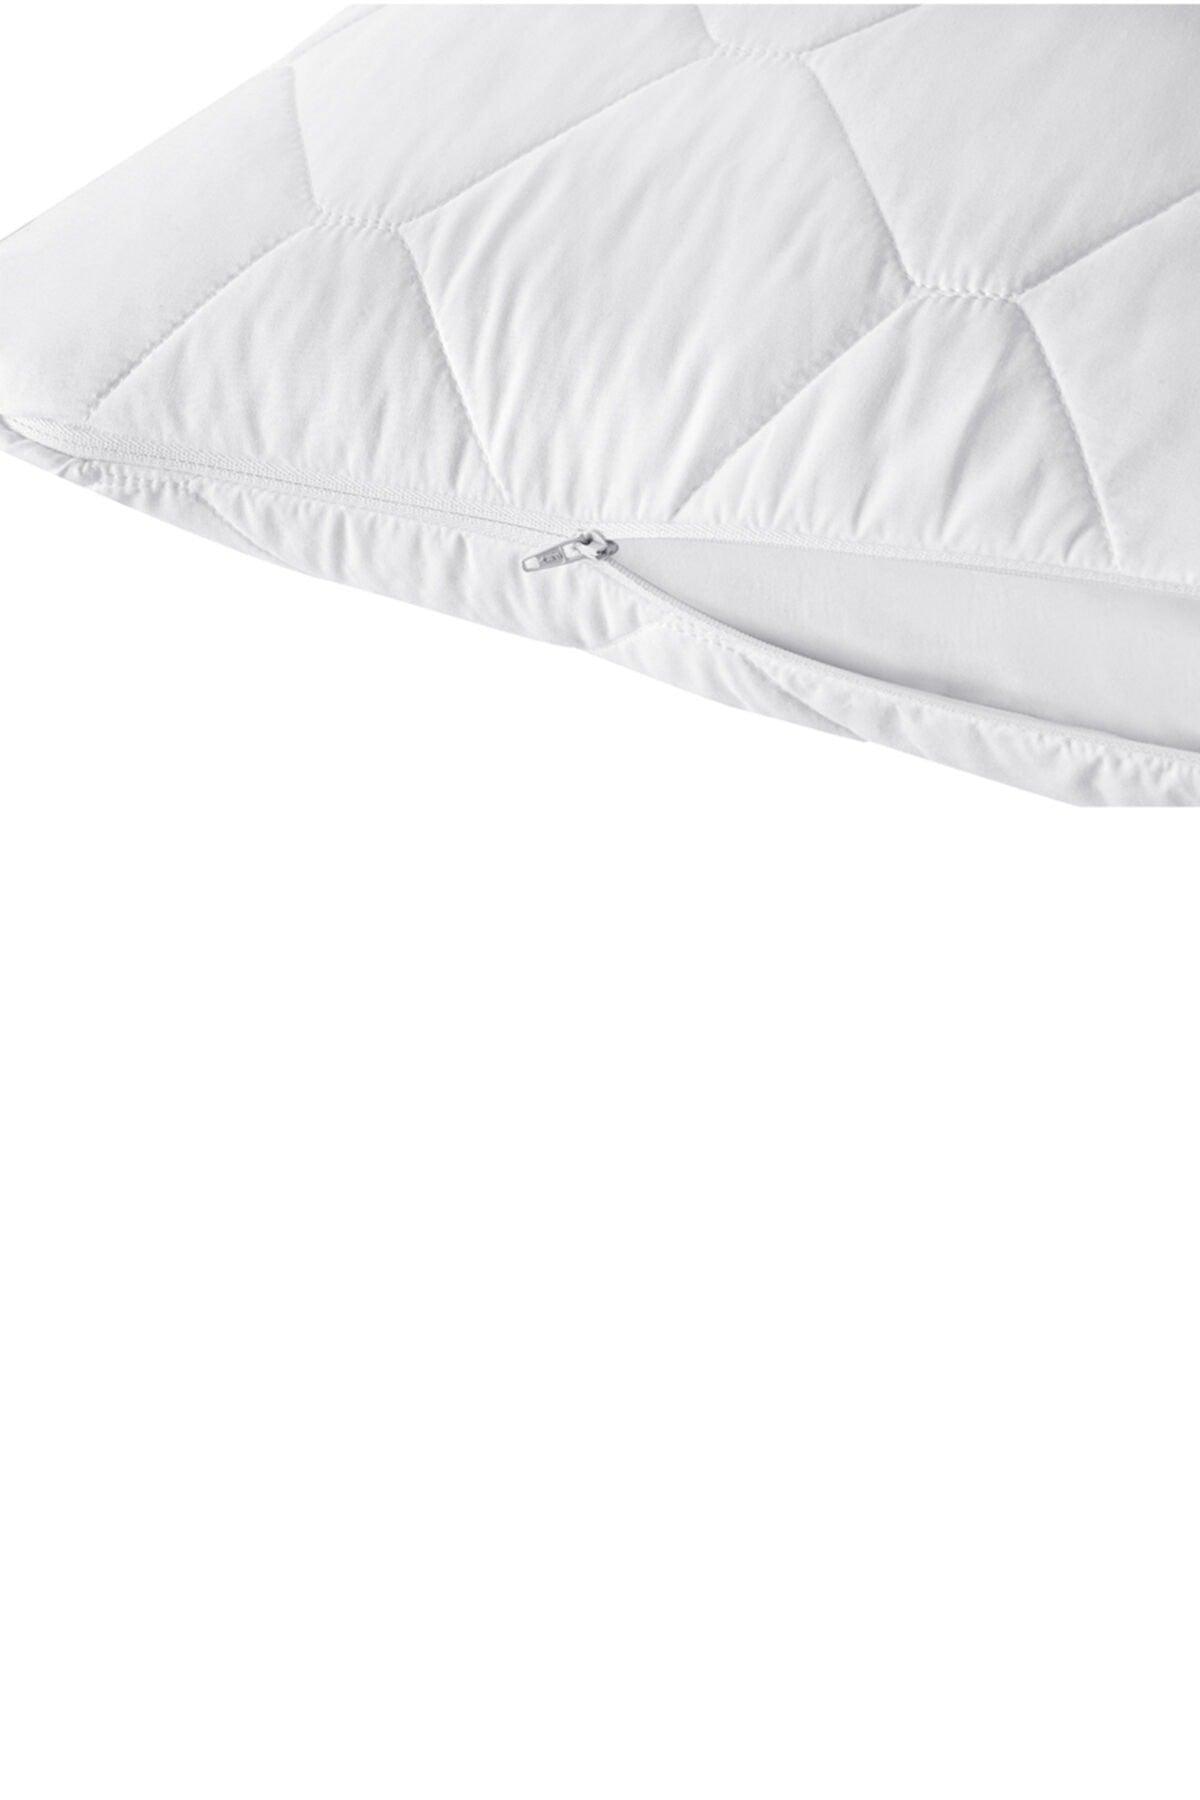 Classy Quilted Protective Pillow Underlayment - Swordslife